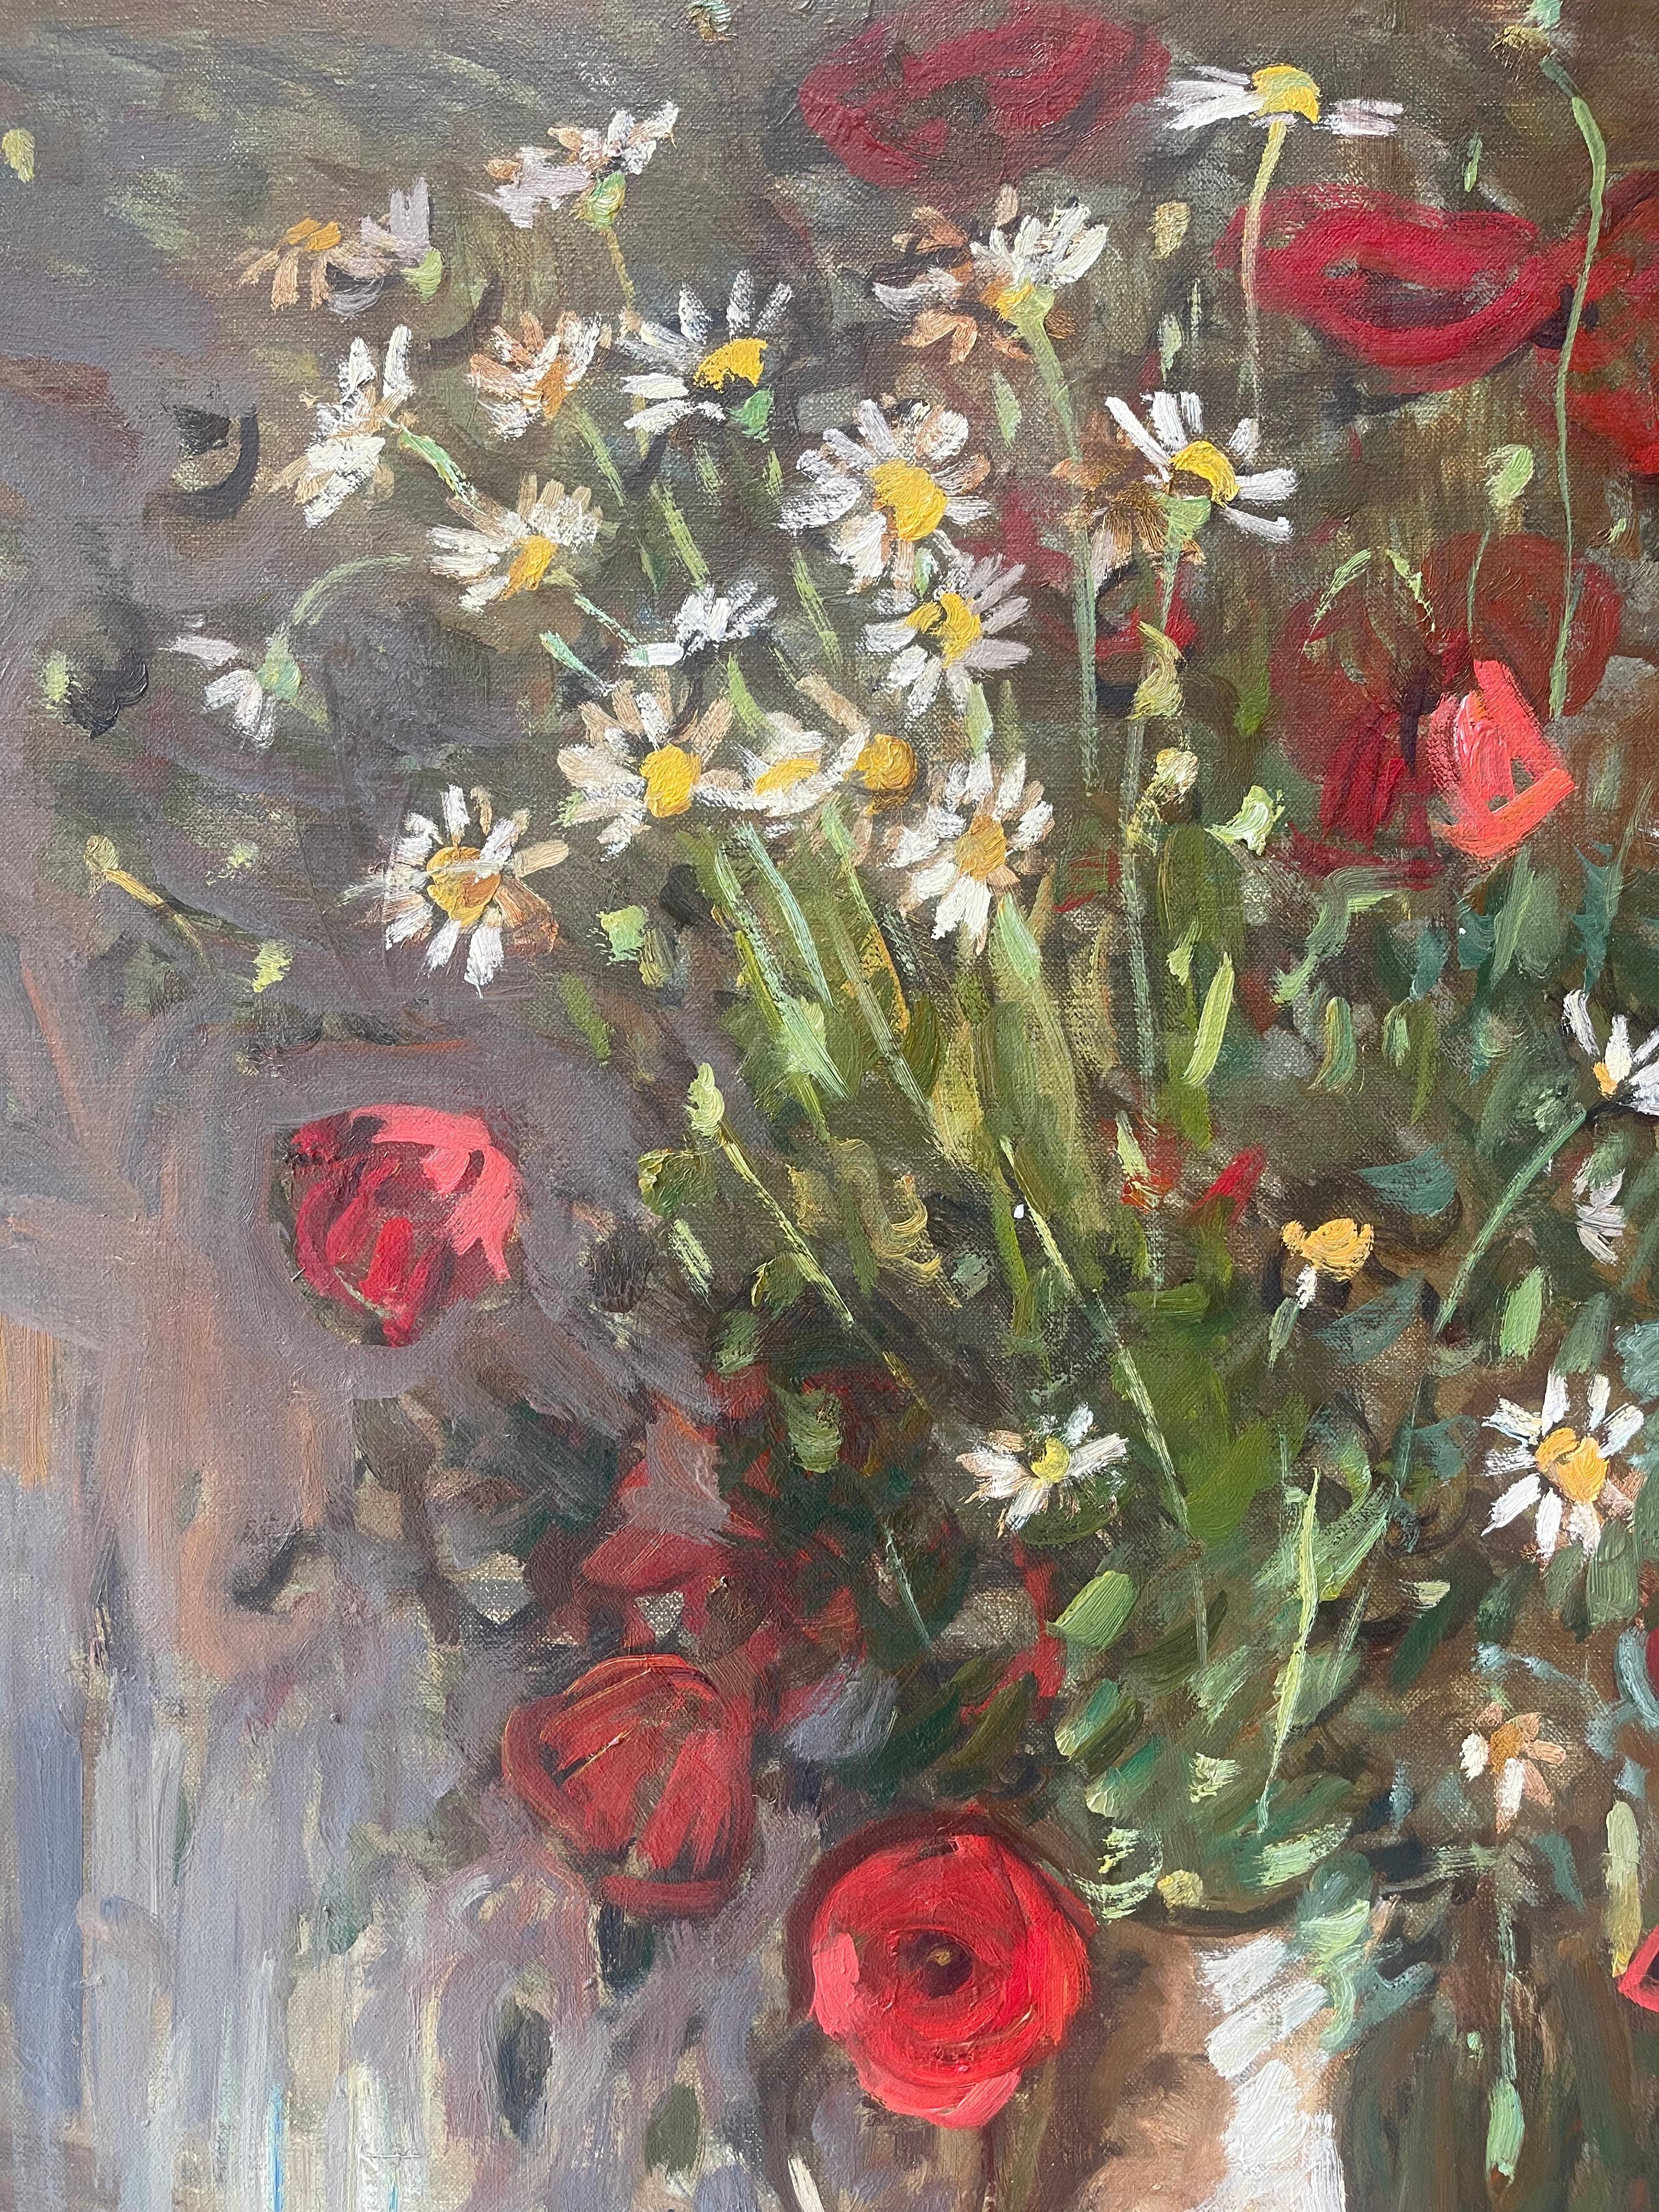 An oil painting of Tuscan wildflowers (red poppies, chamomile, and daisies), by Contemporary American Impressionist Ben Fenske. 

Painting dimensions: 35.5 x 29.5 inches
Framed Dimensions: 41 x 35 inches

Inspired by the French Impressionists, Ben